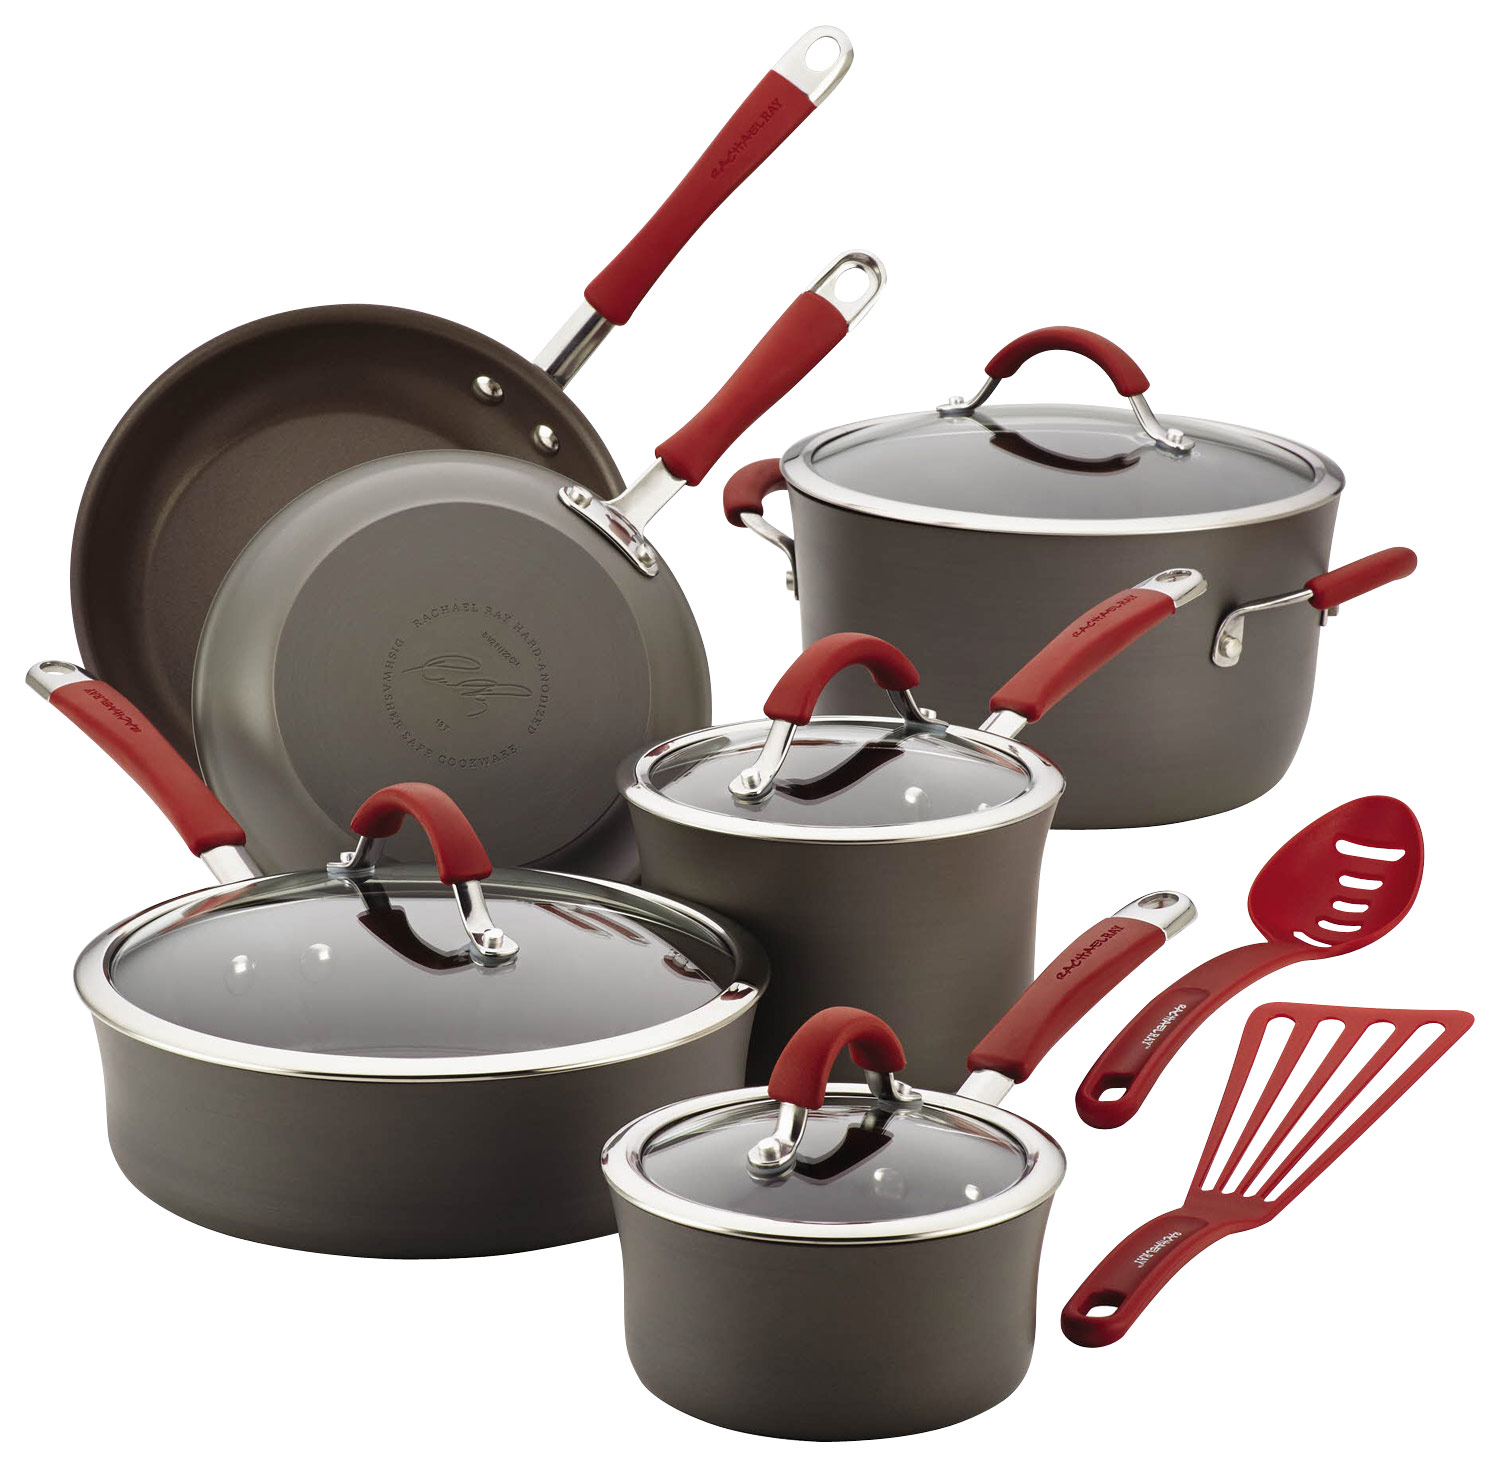 Rachael Ray - Cucina 12-Piece Cookware Set - Gray/Cranberry Red was $360.99 now $182.99 (49.0% off)